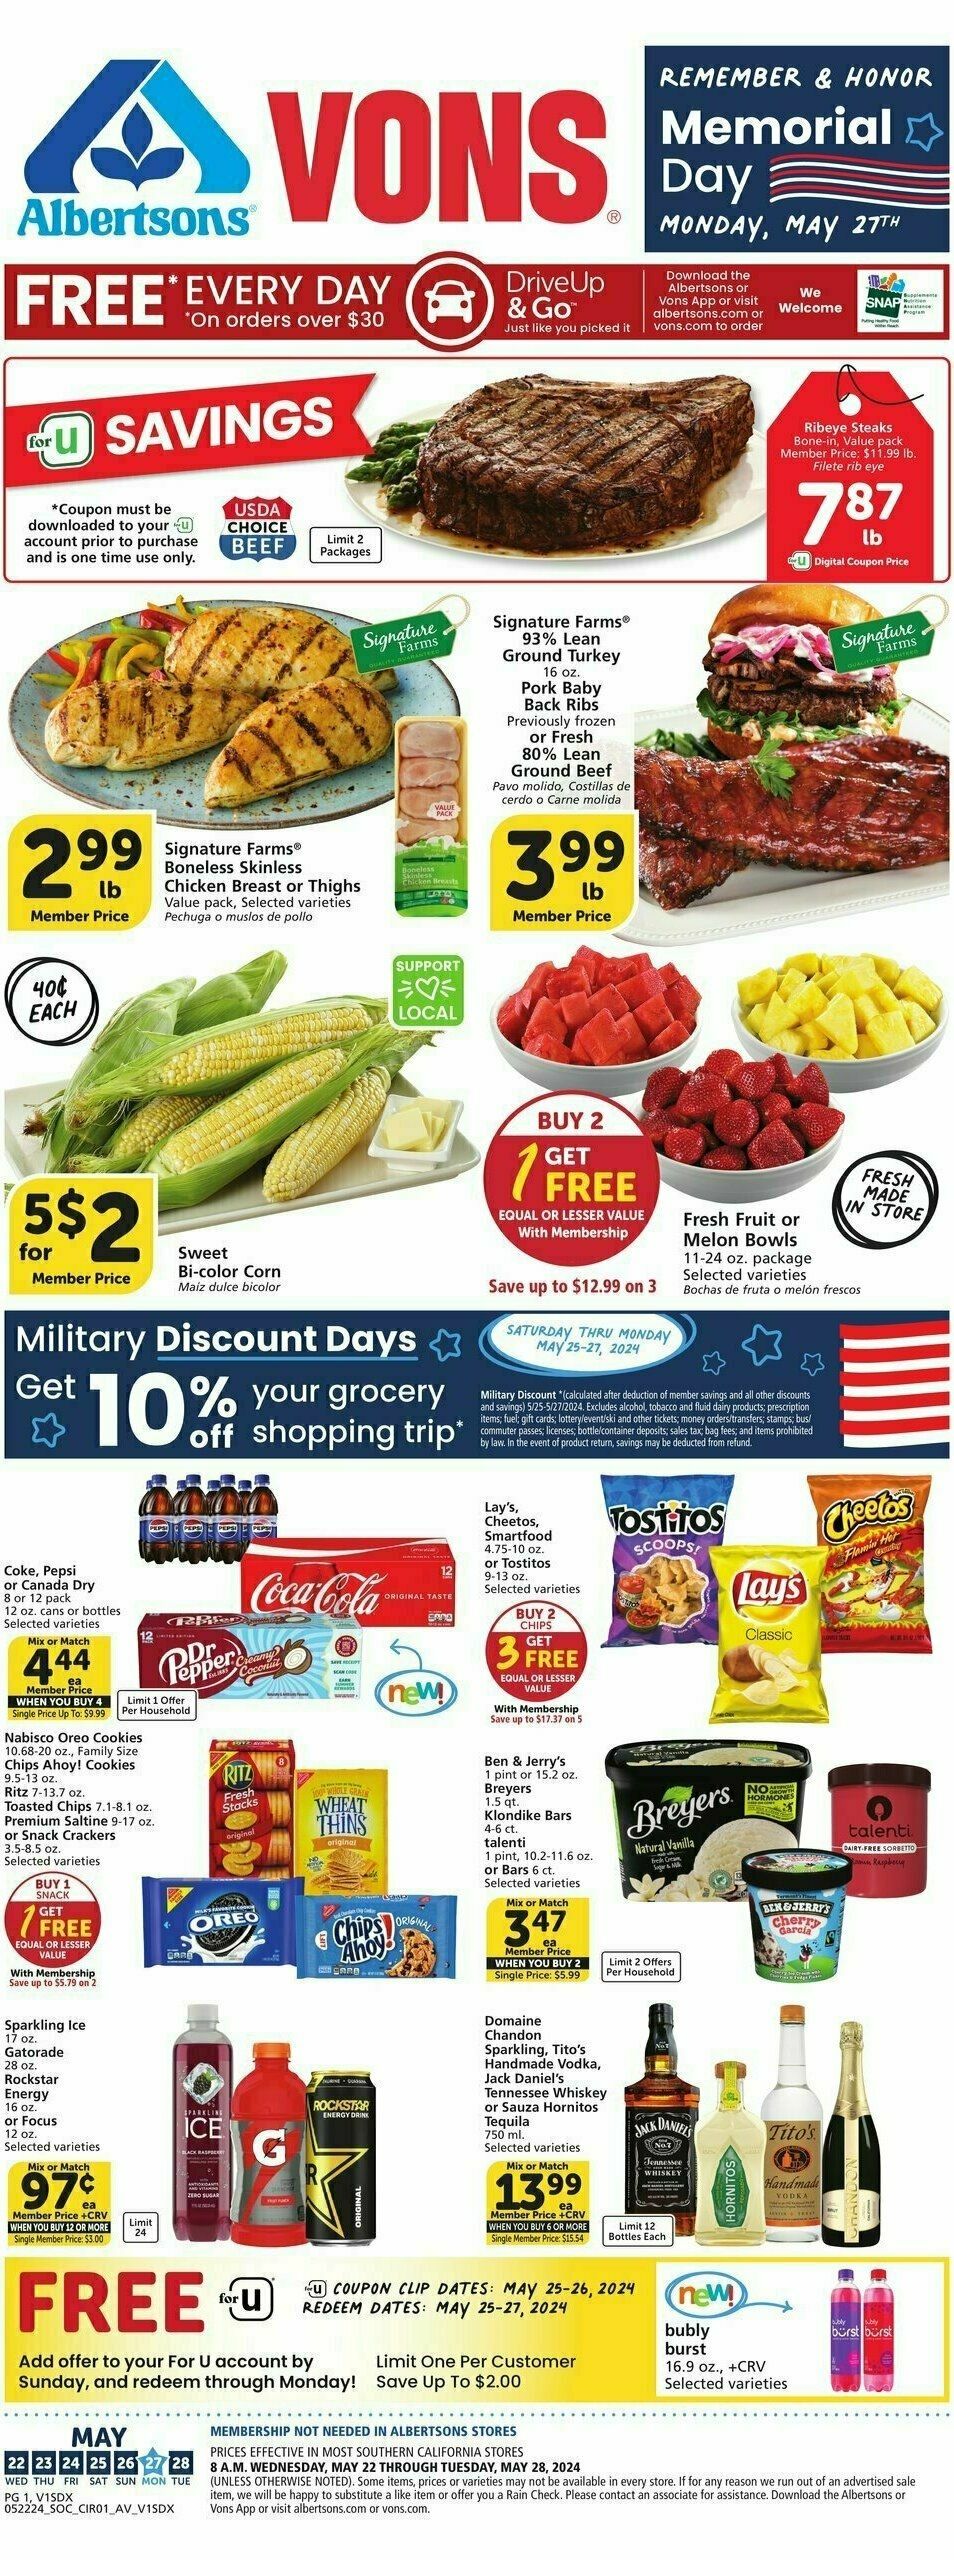 Vons Weekly Ad from May 22